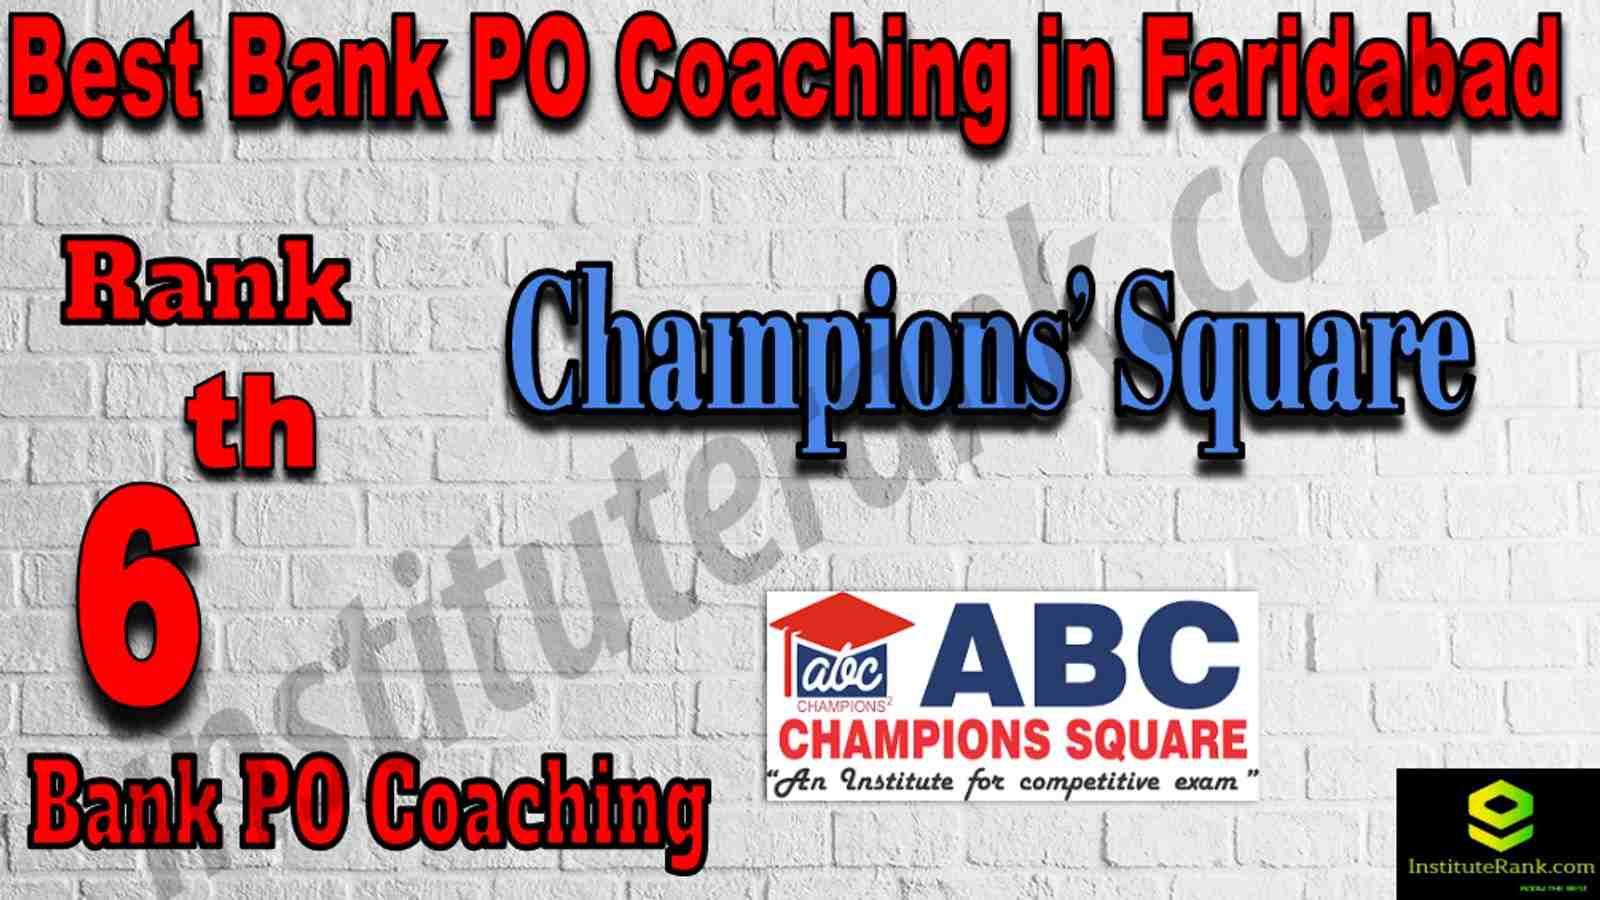 6th Best Bank PO Coaching in Faridabad